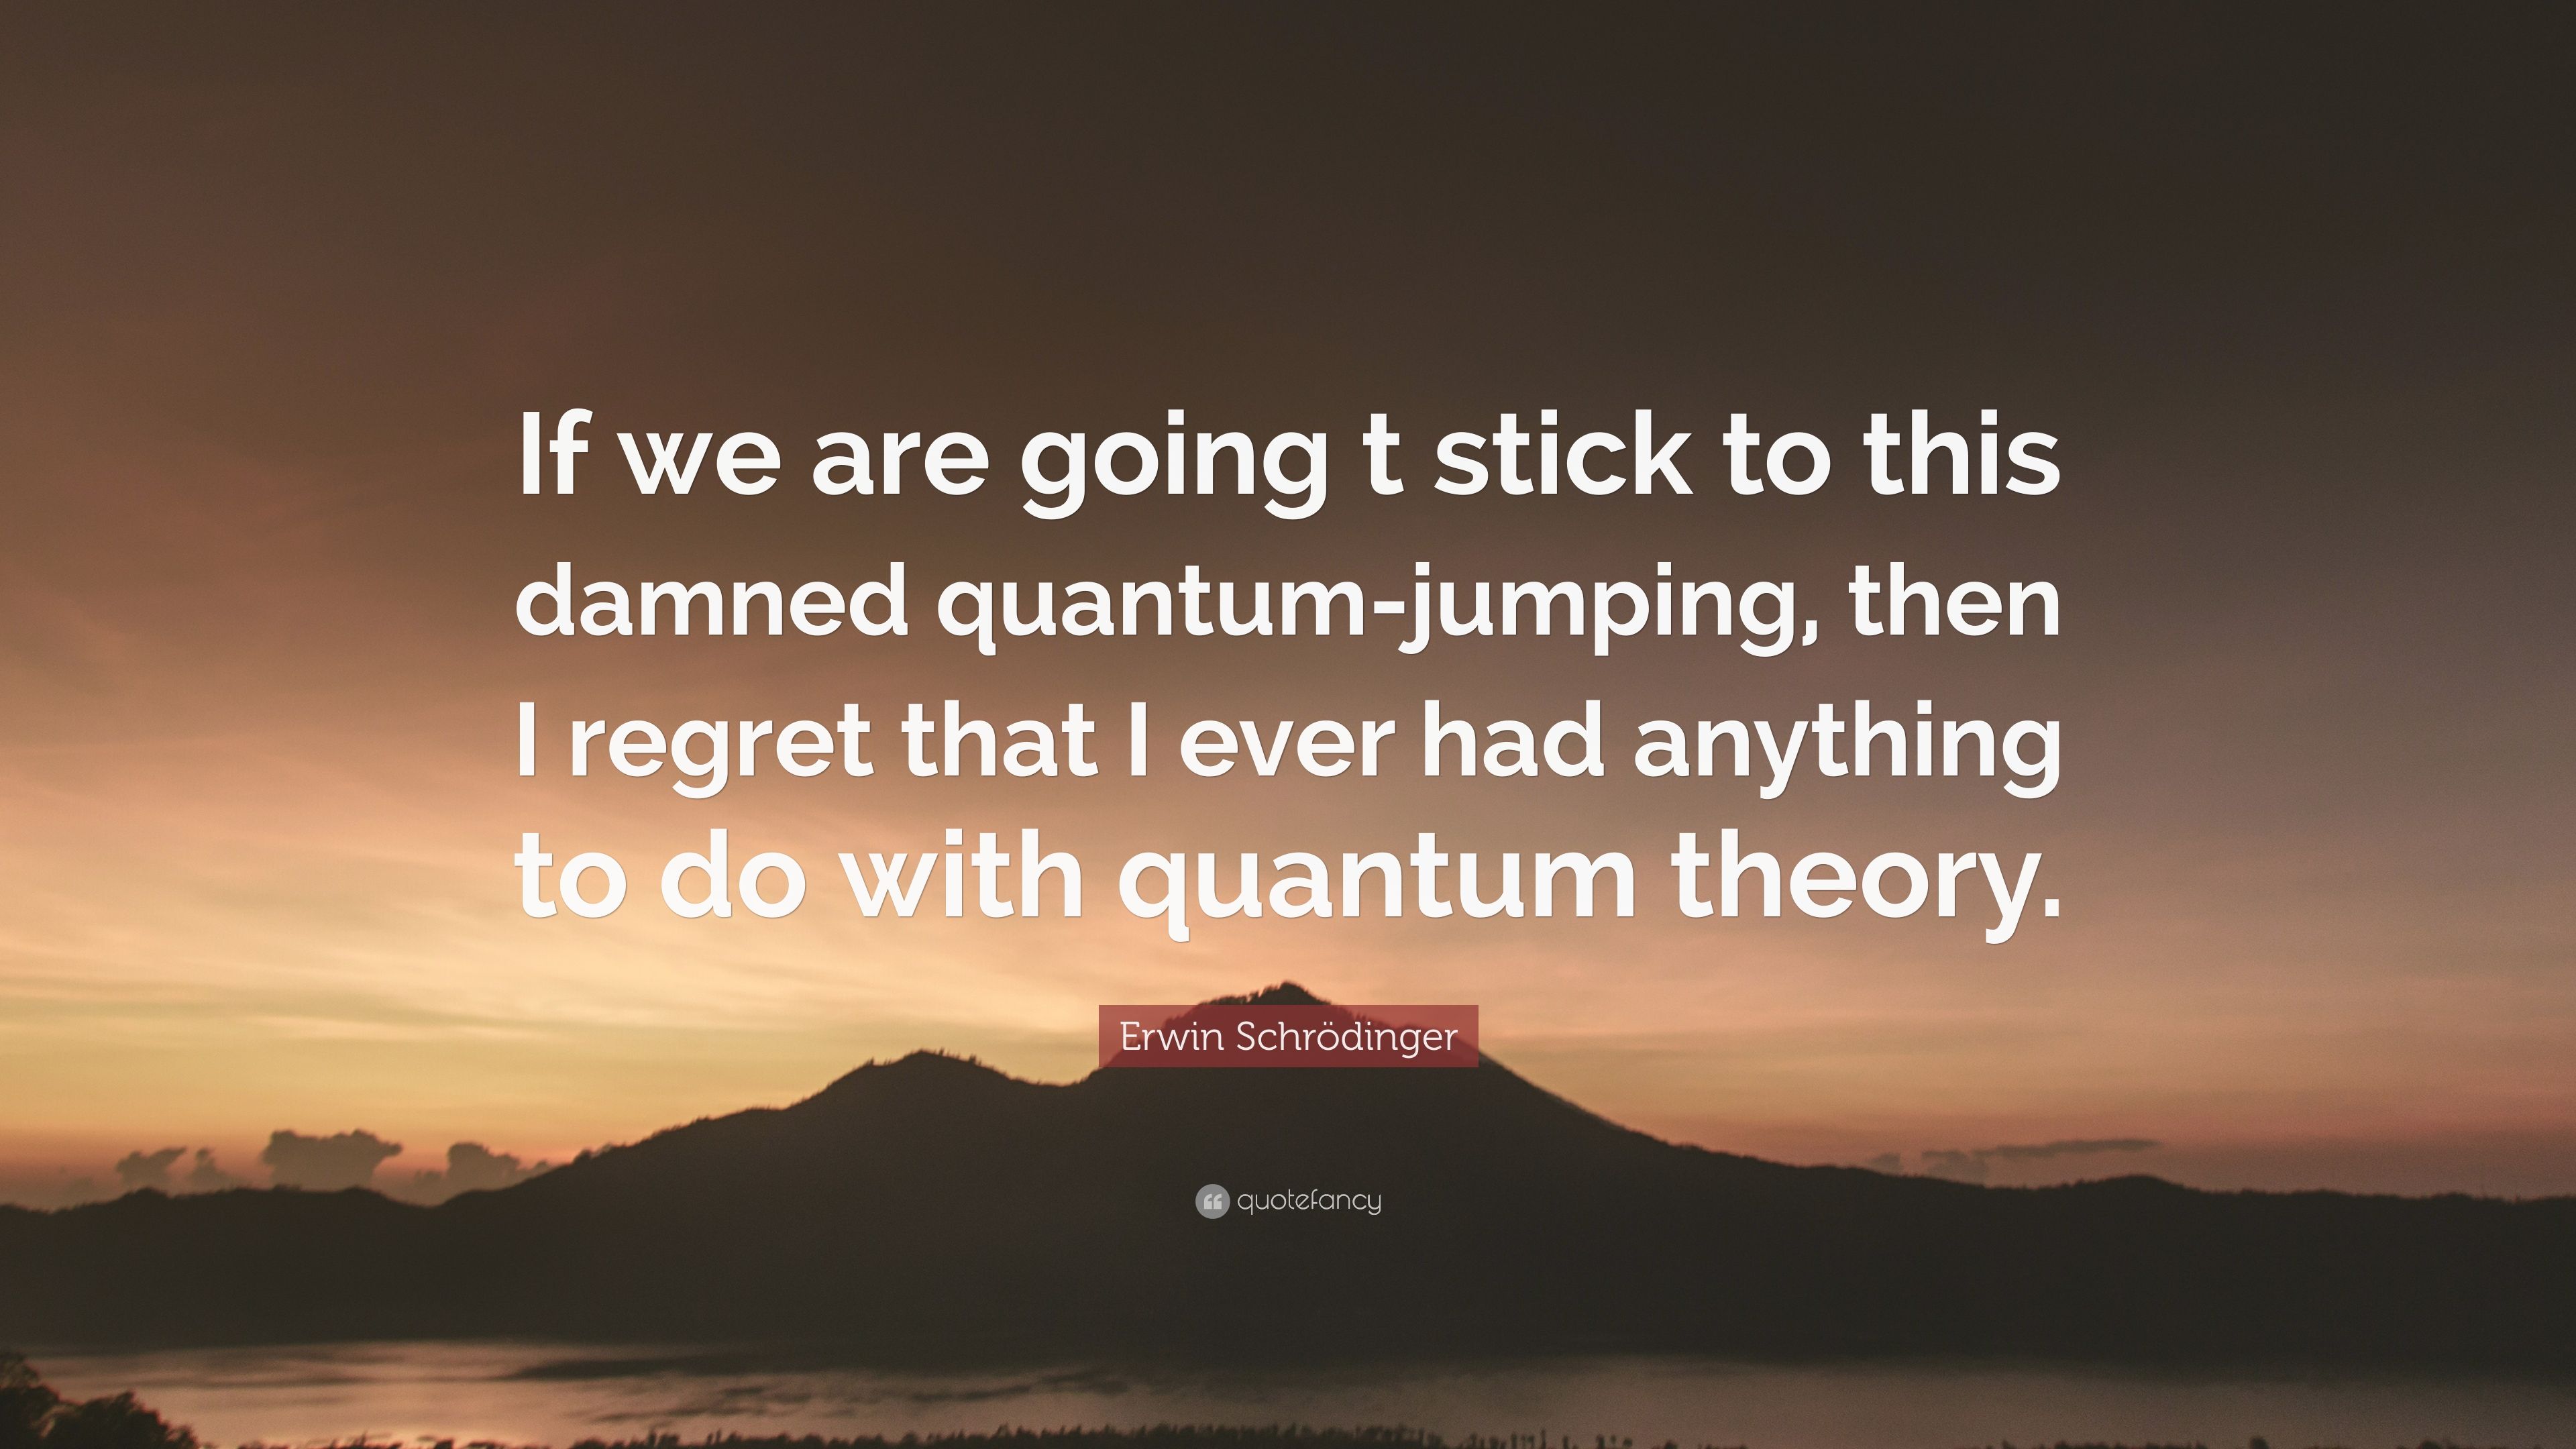 Damned Quantum Jumping, Then .quotefancy.com